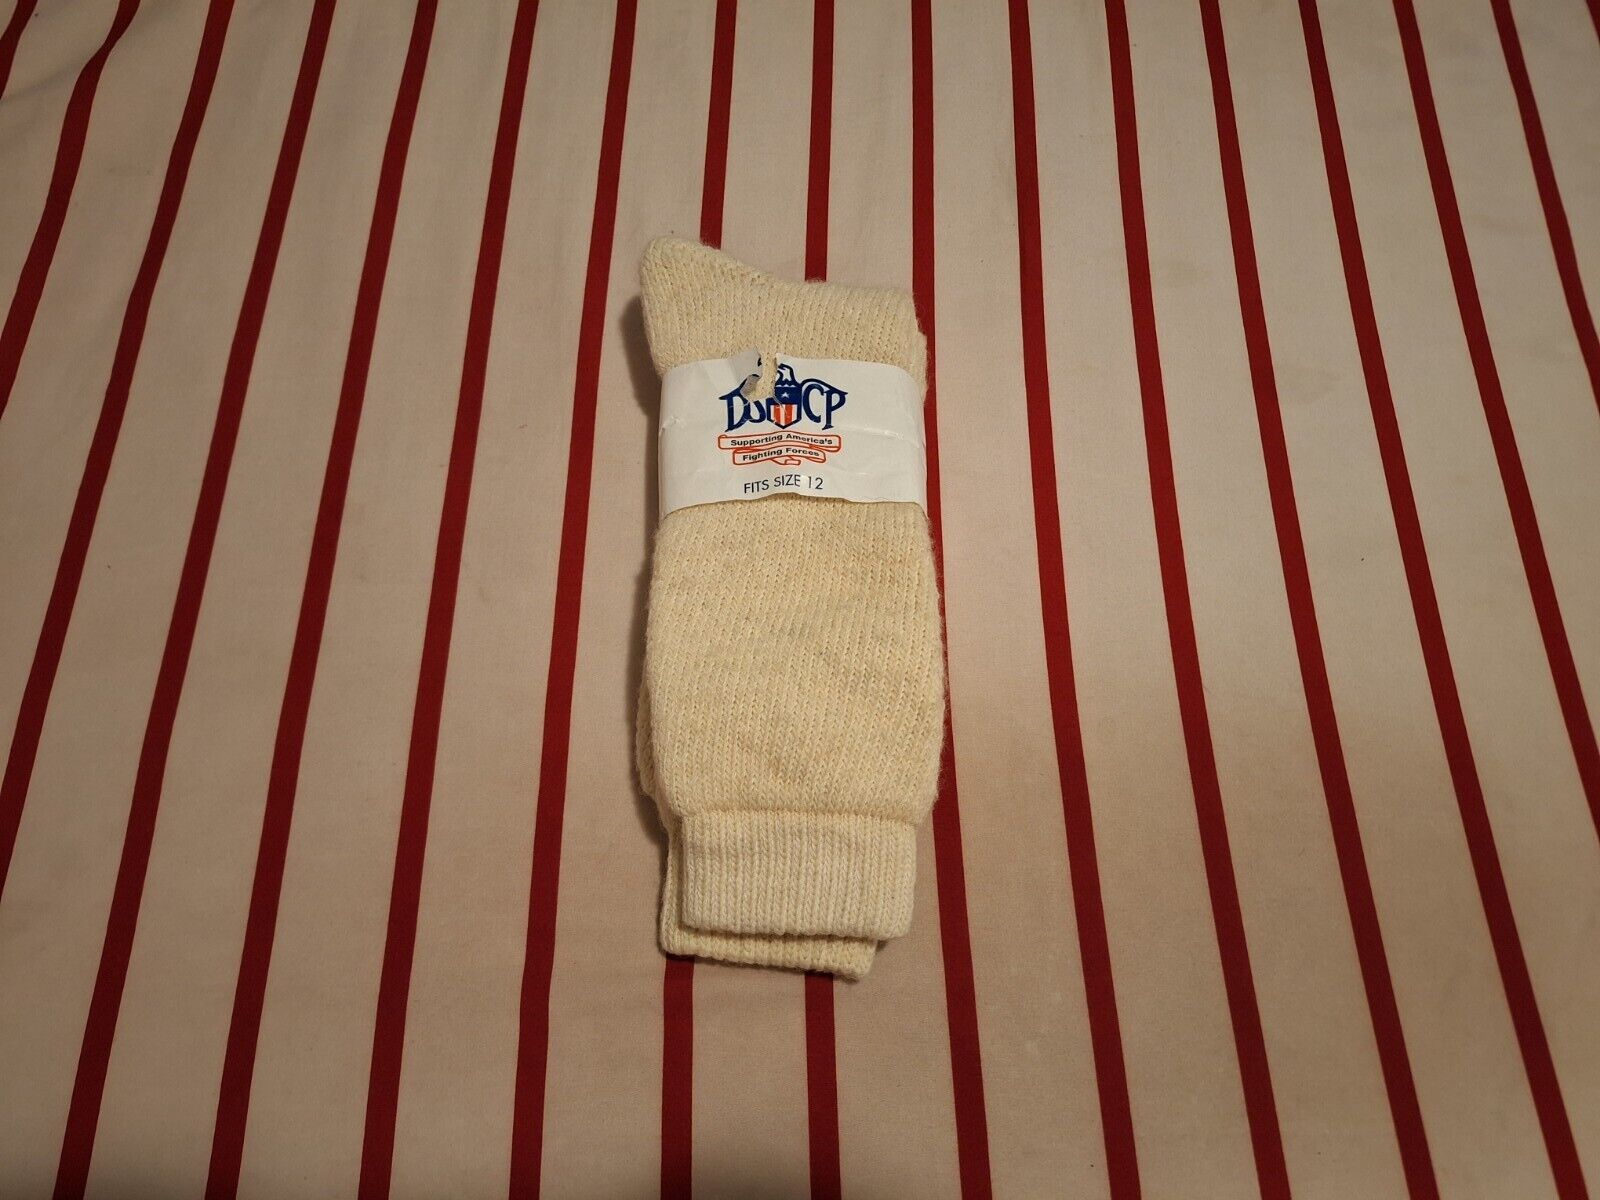 U.S. Army Wool Cold Weather Pair Of Socks Size 12 New